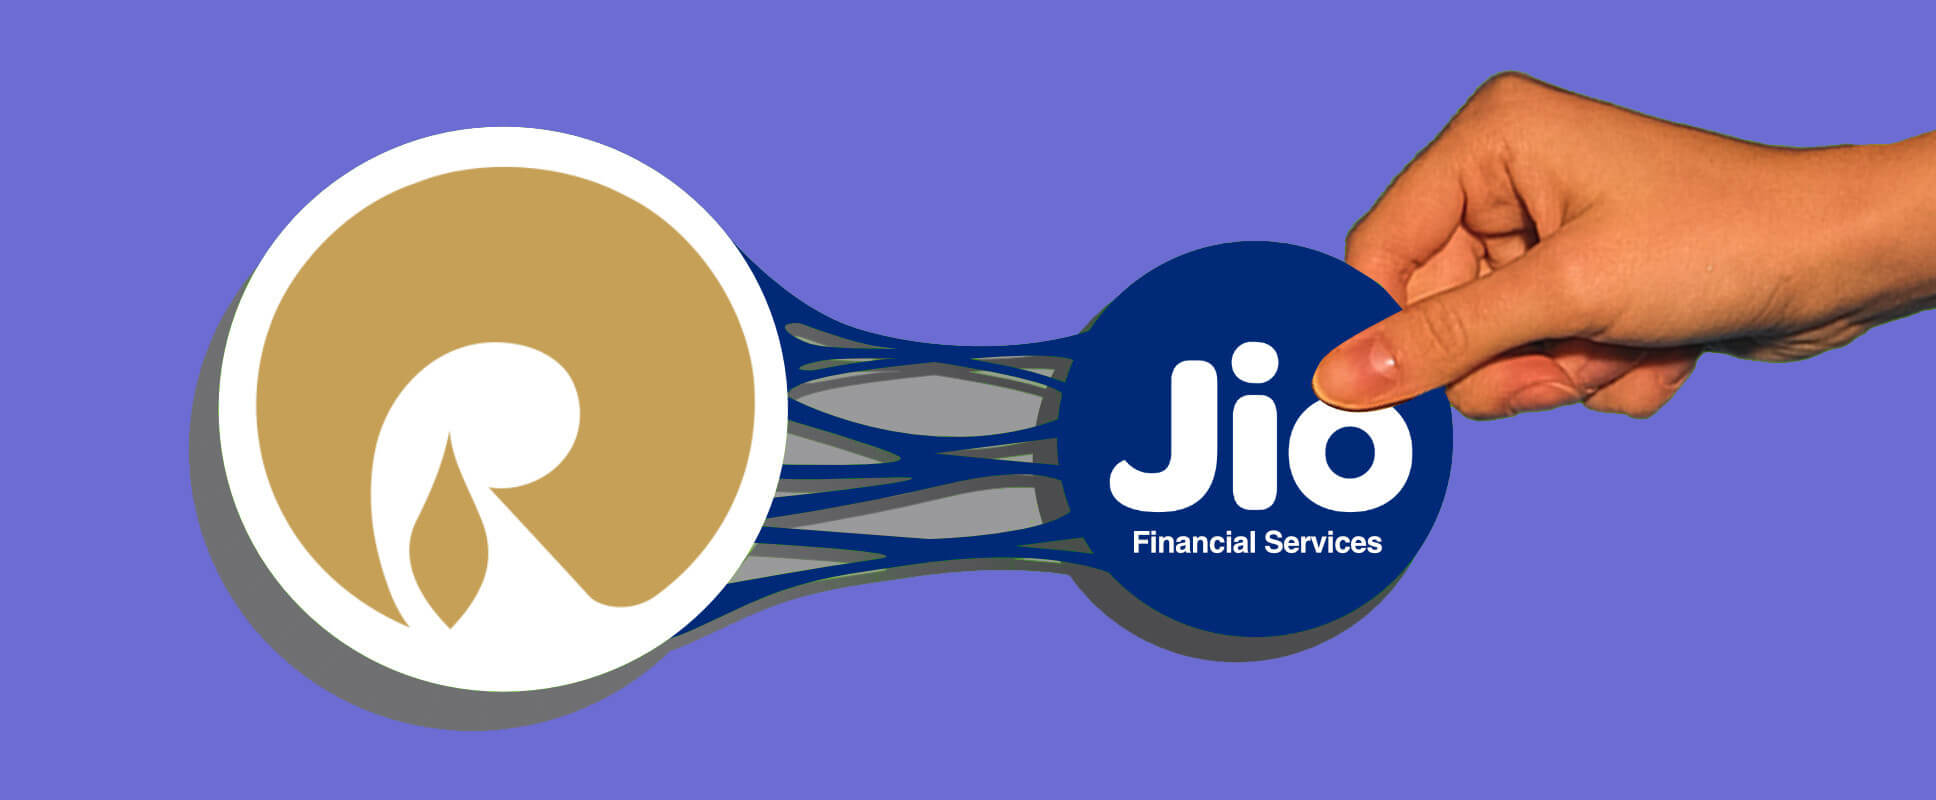 research report on jio financial services